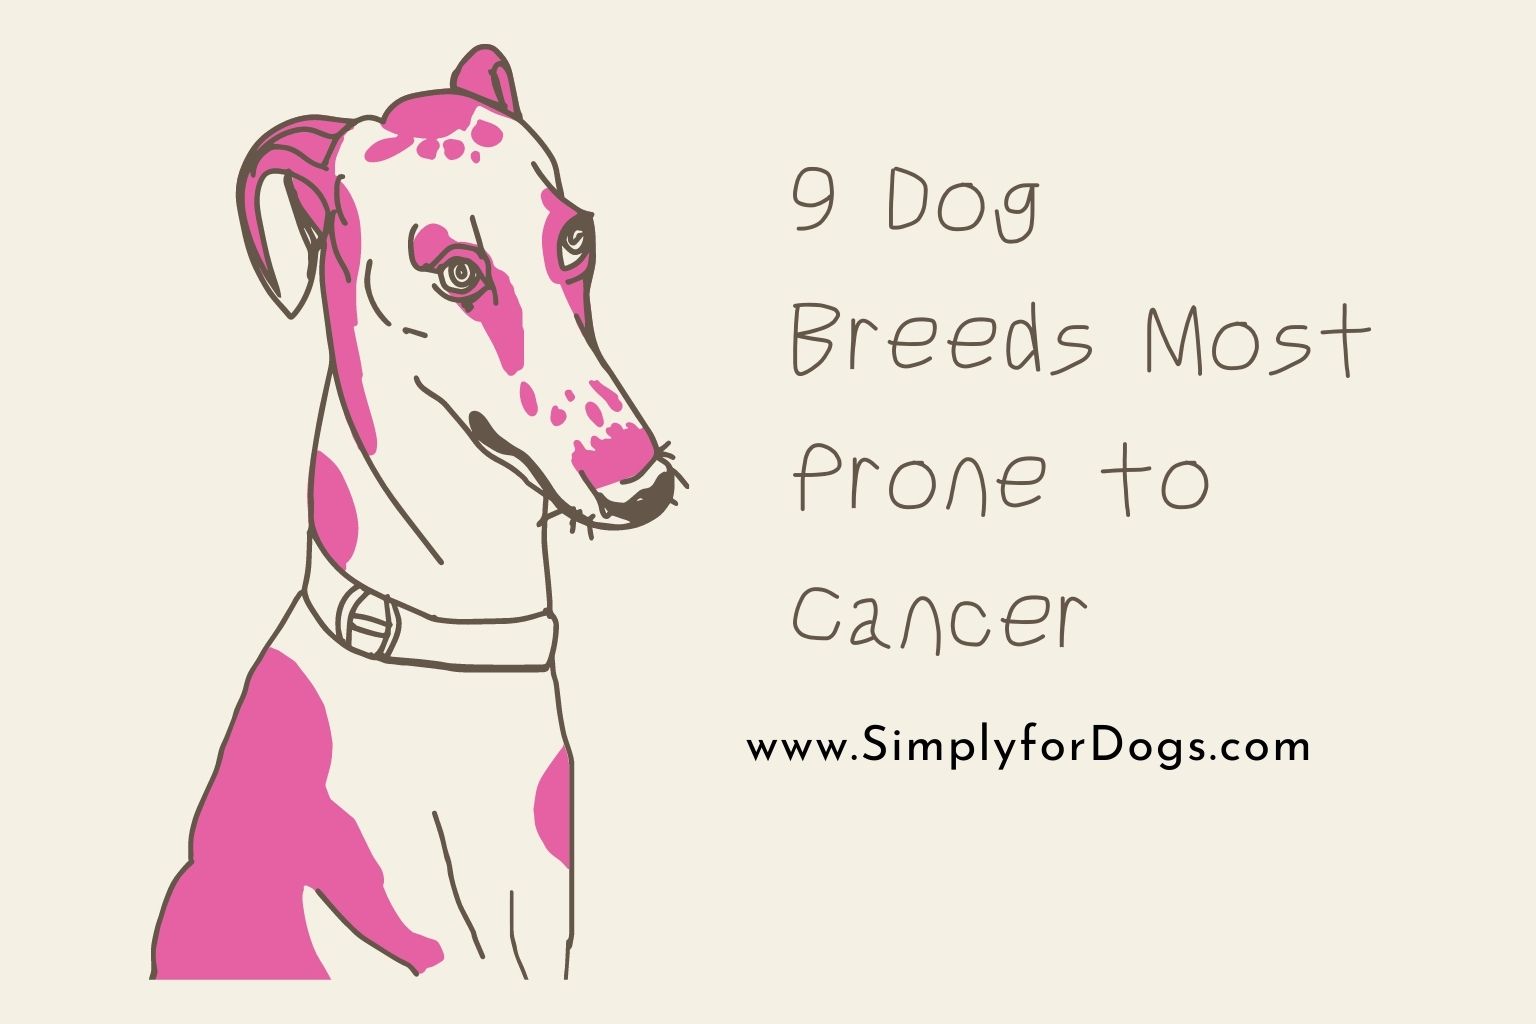 9 Dog Breeds Most Prone to Cancer